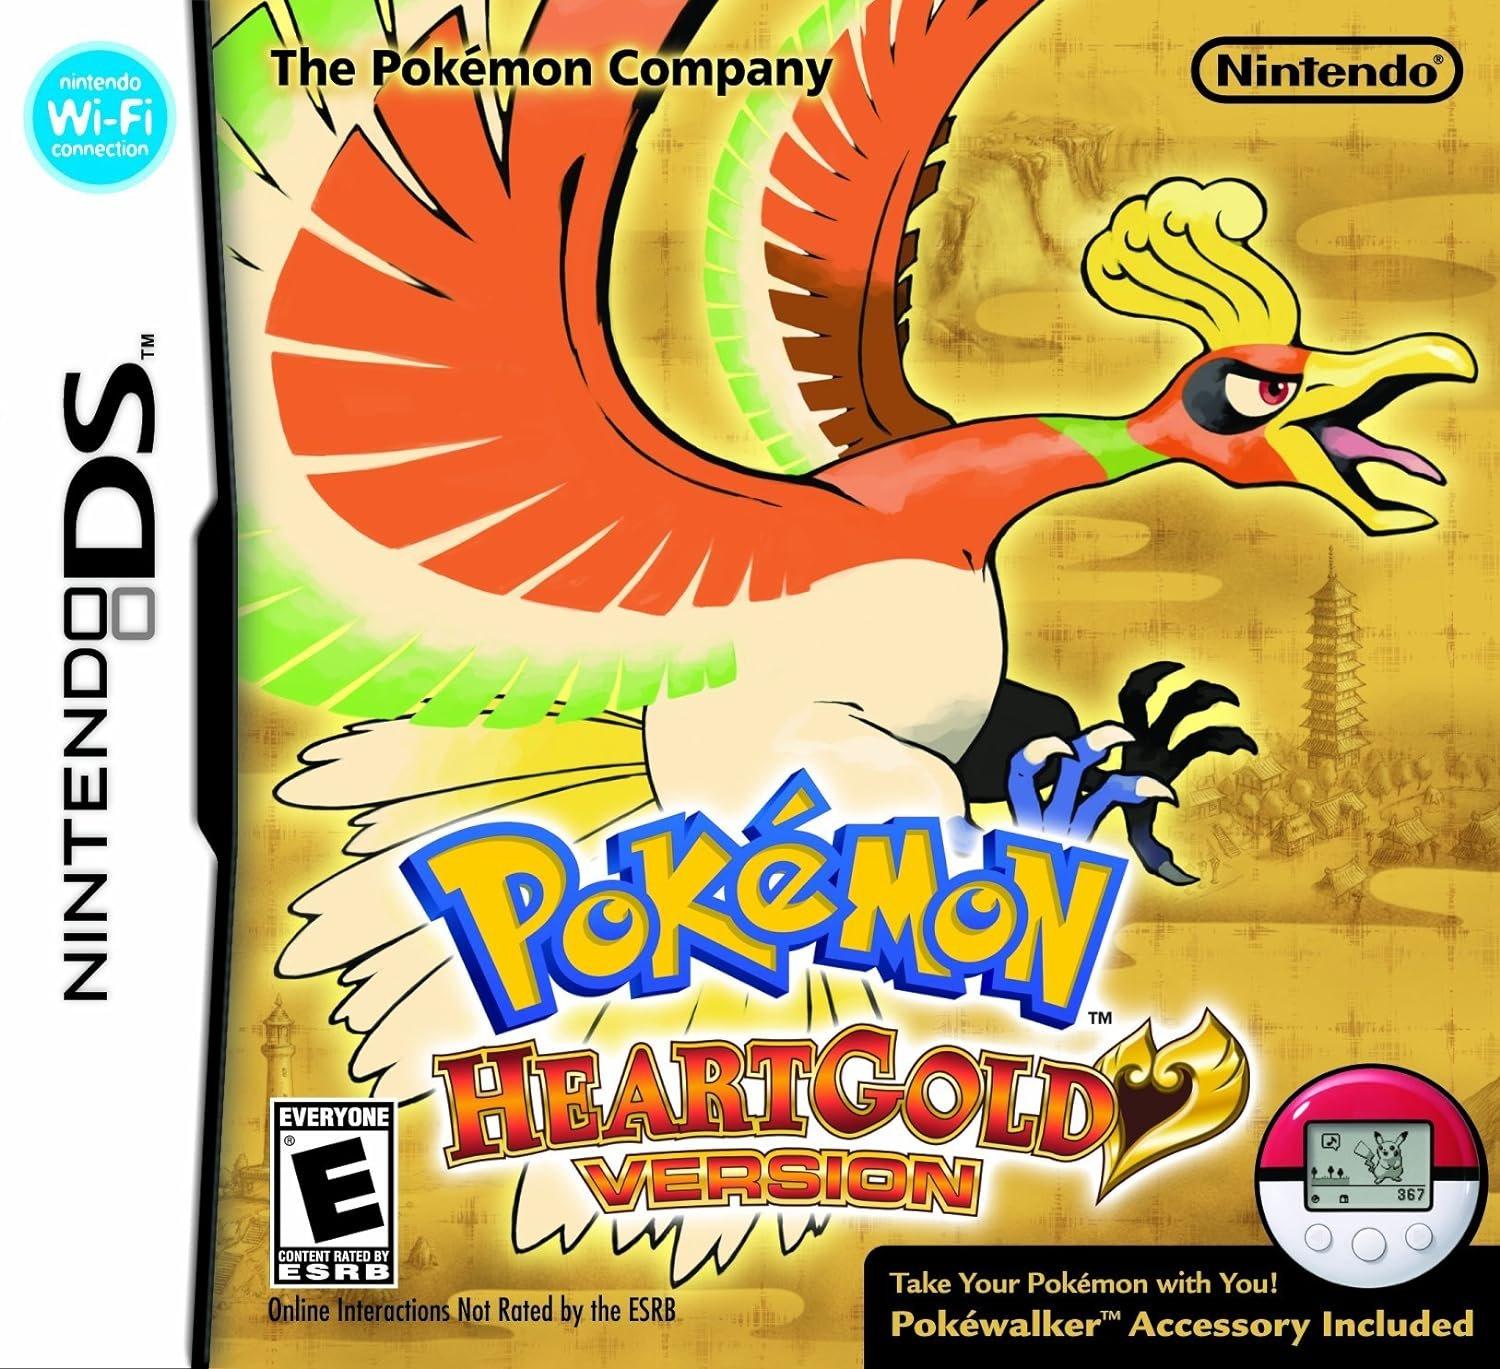 can i play heartgold on 3ds